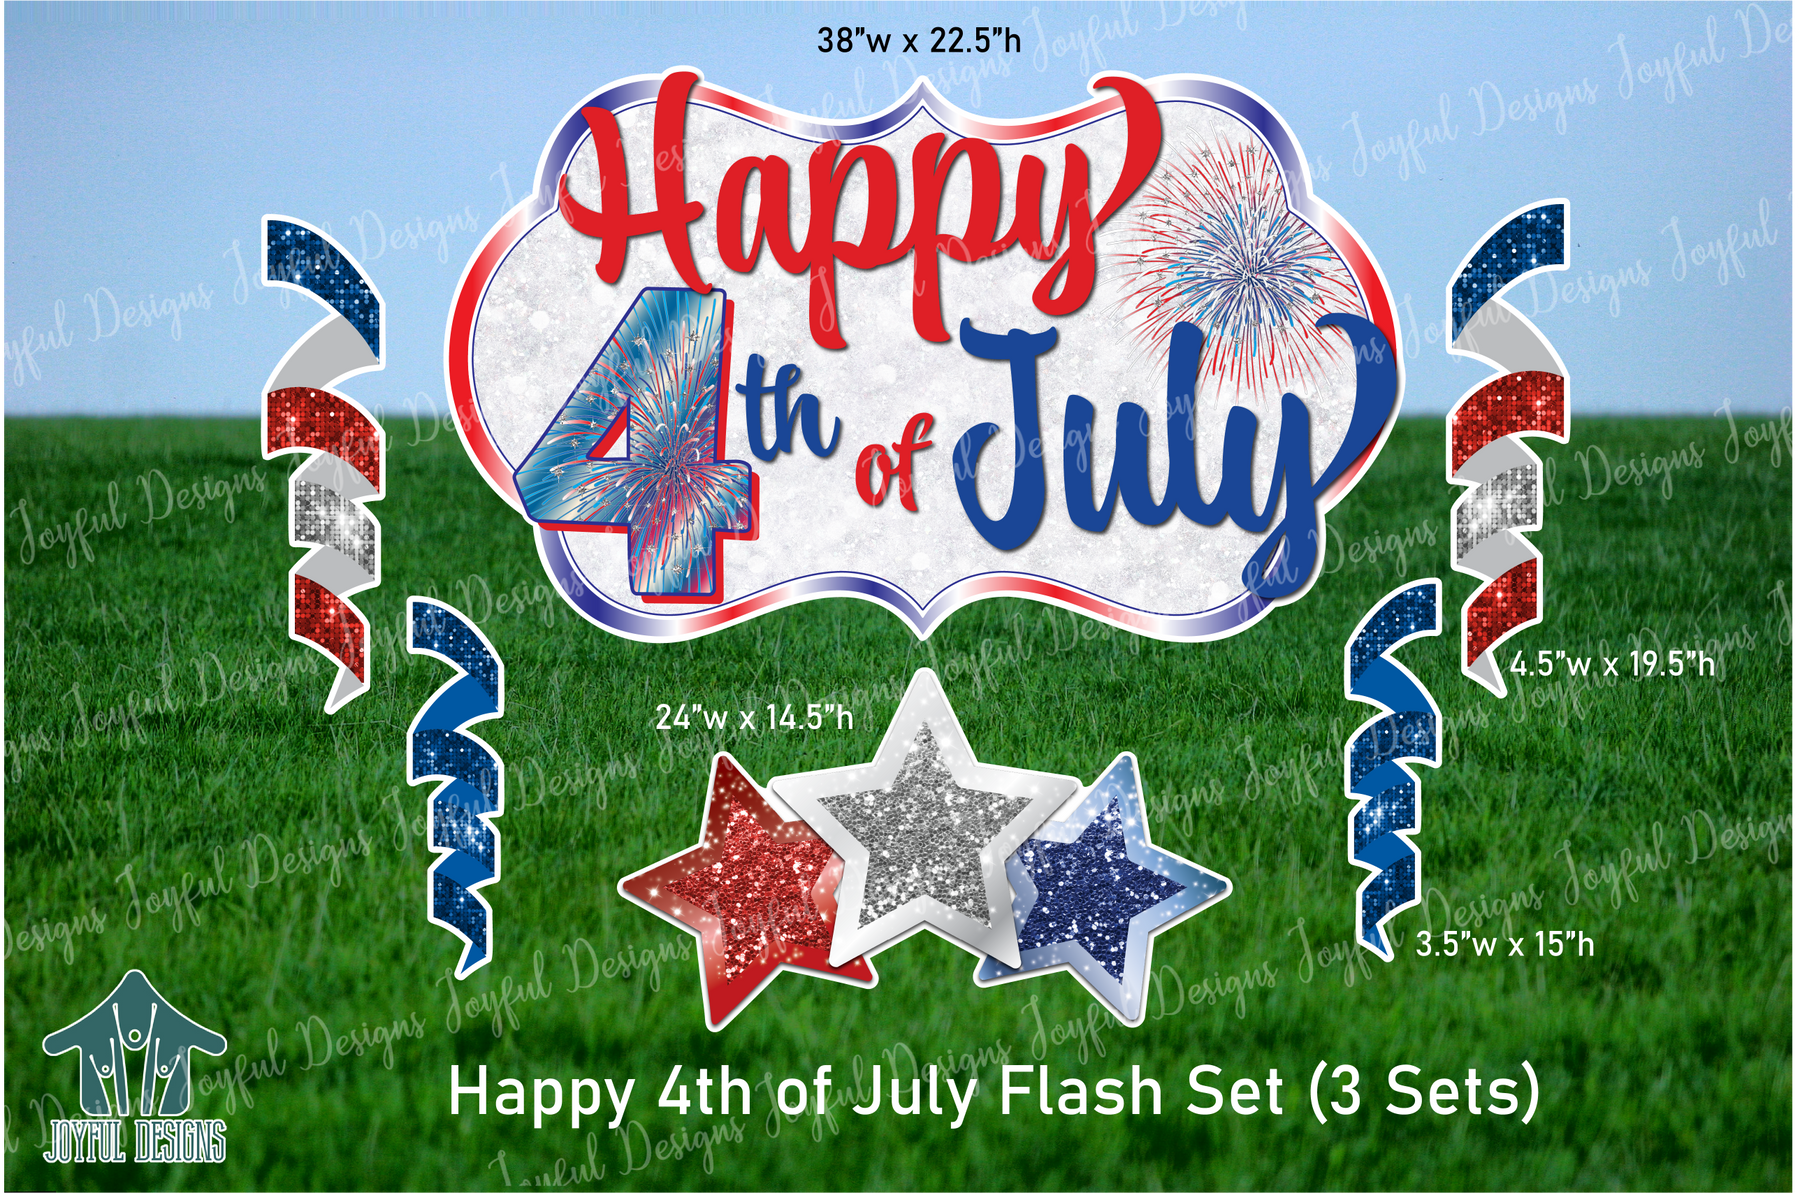 4th of July Centerpiece & Flair Set (Set of 3)